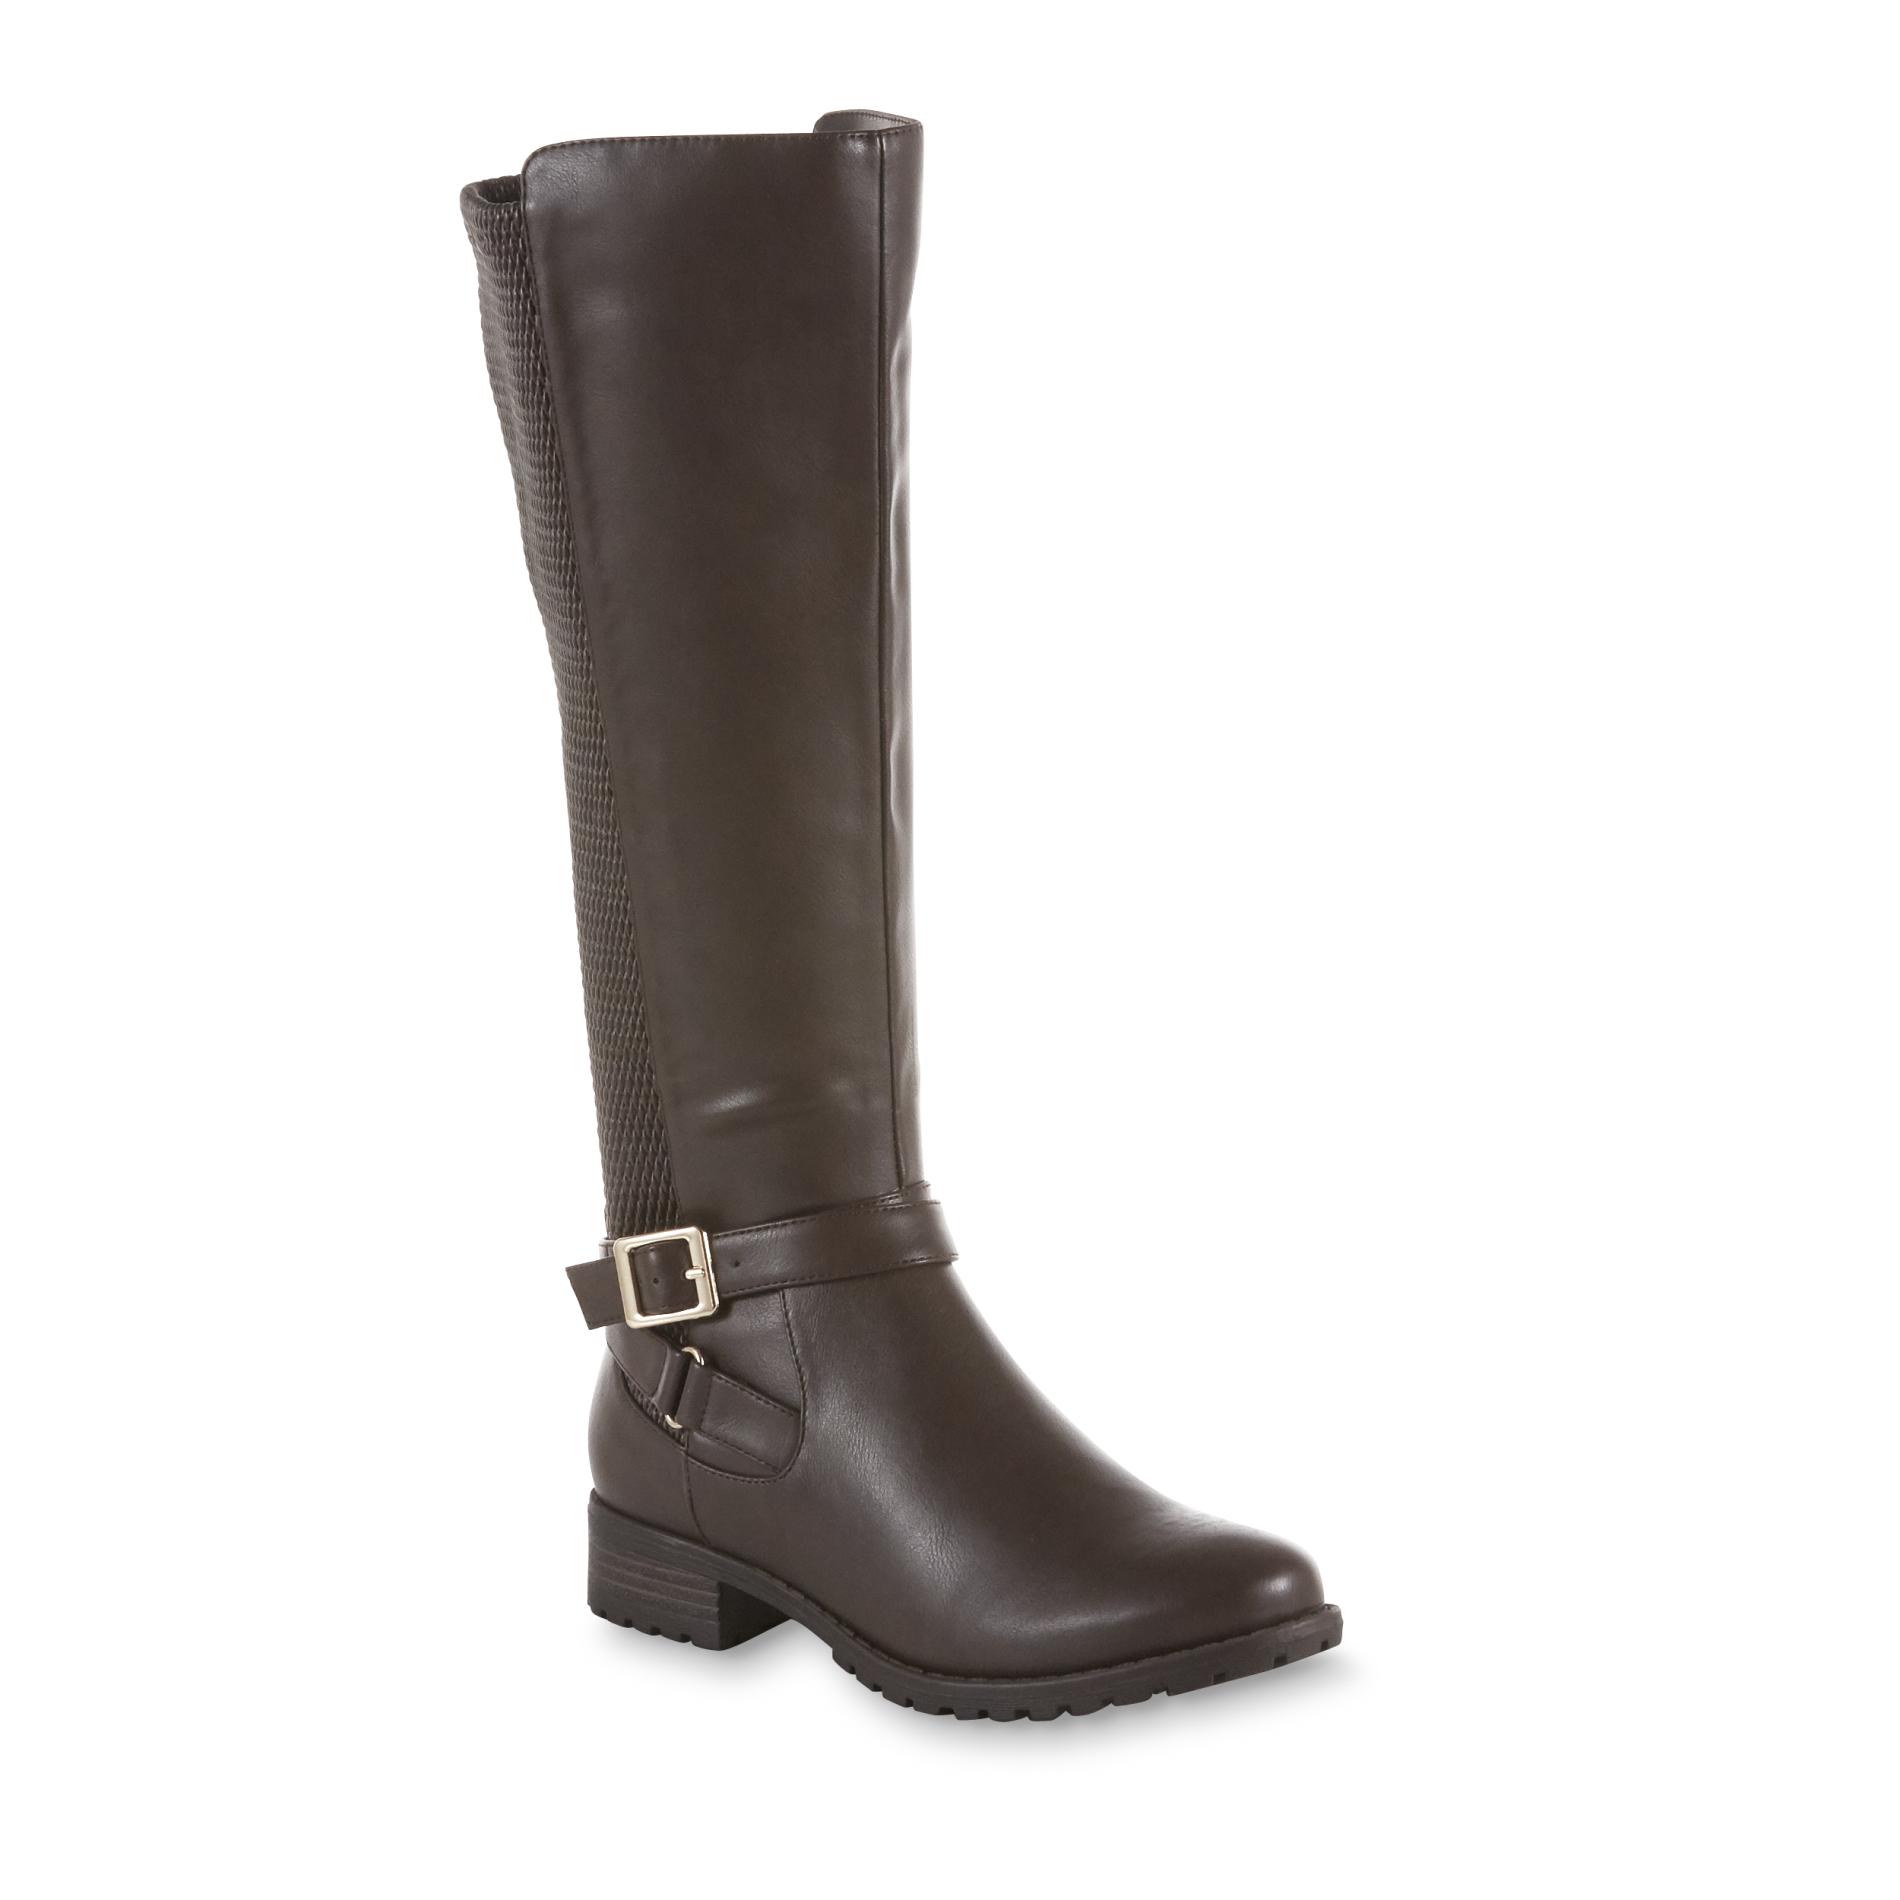 Basic Editions Women's Nile Knee-High Boot - Brown